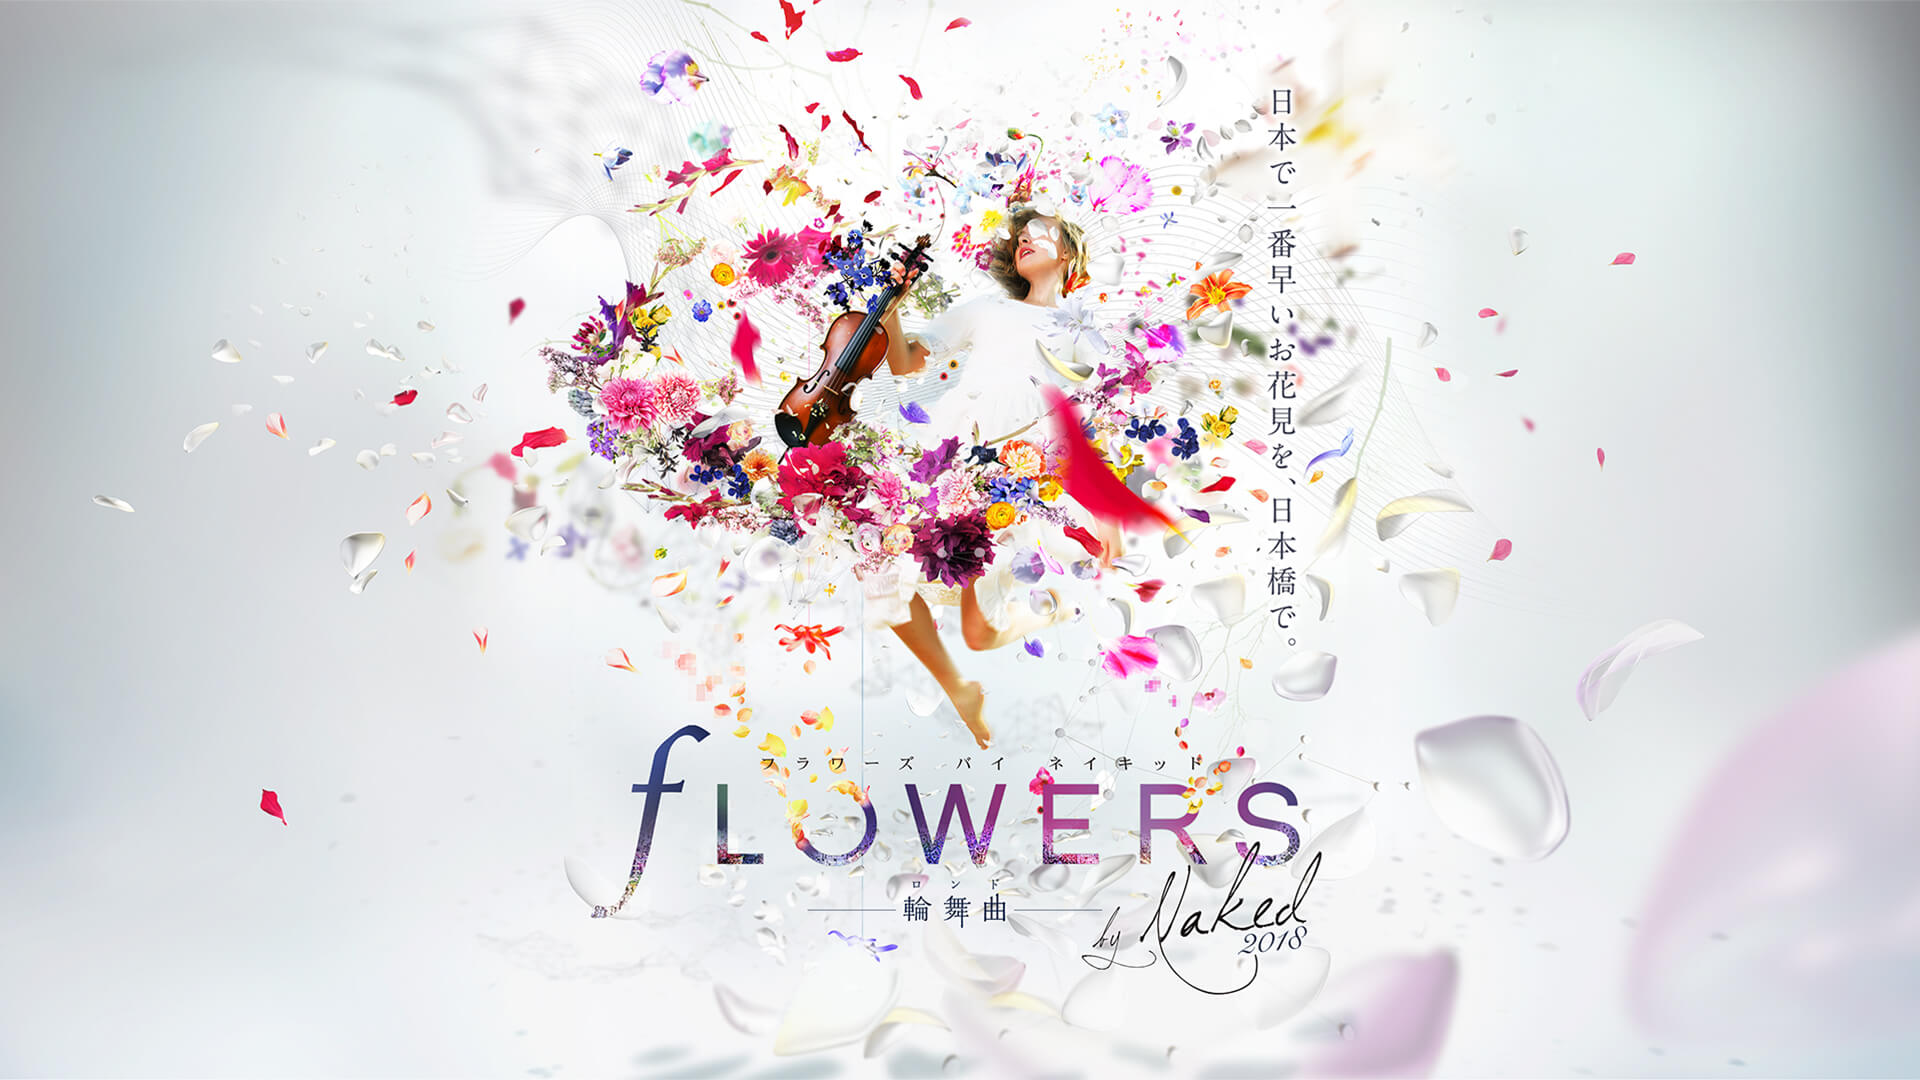 FLOWERS by NAKED 2018 輪舞曲　第2弾ビジュアル公開！ NAKED FLOWERS 2021 −桜− 世界遺産・二条城